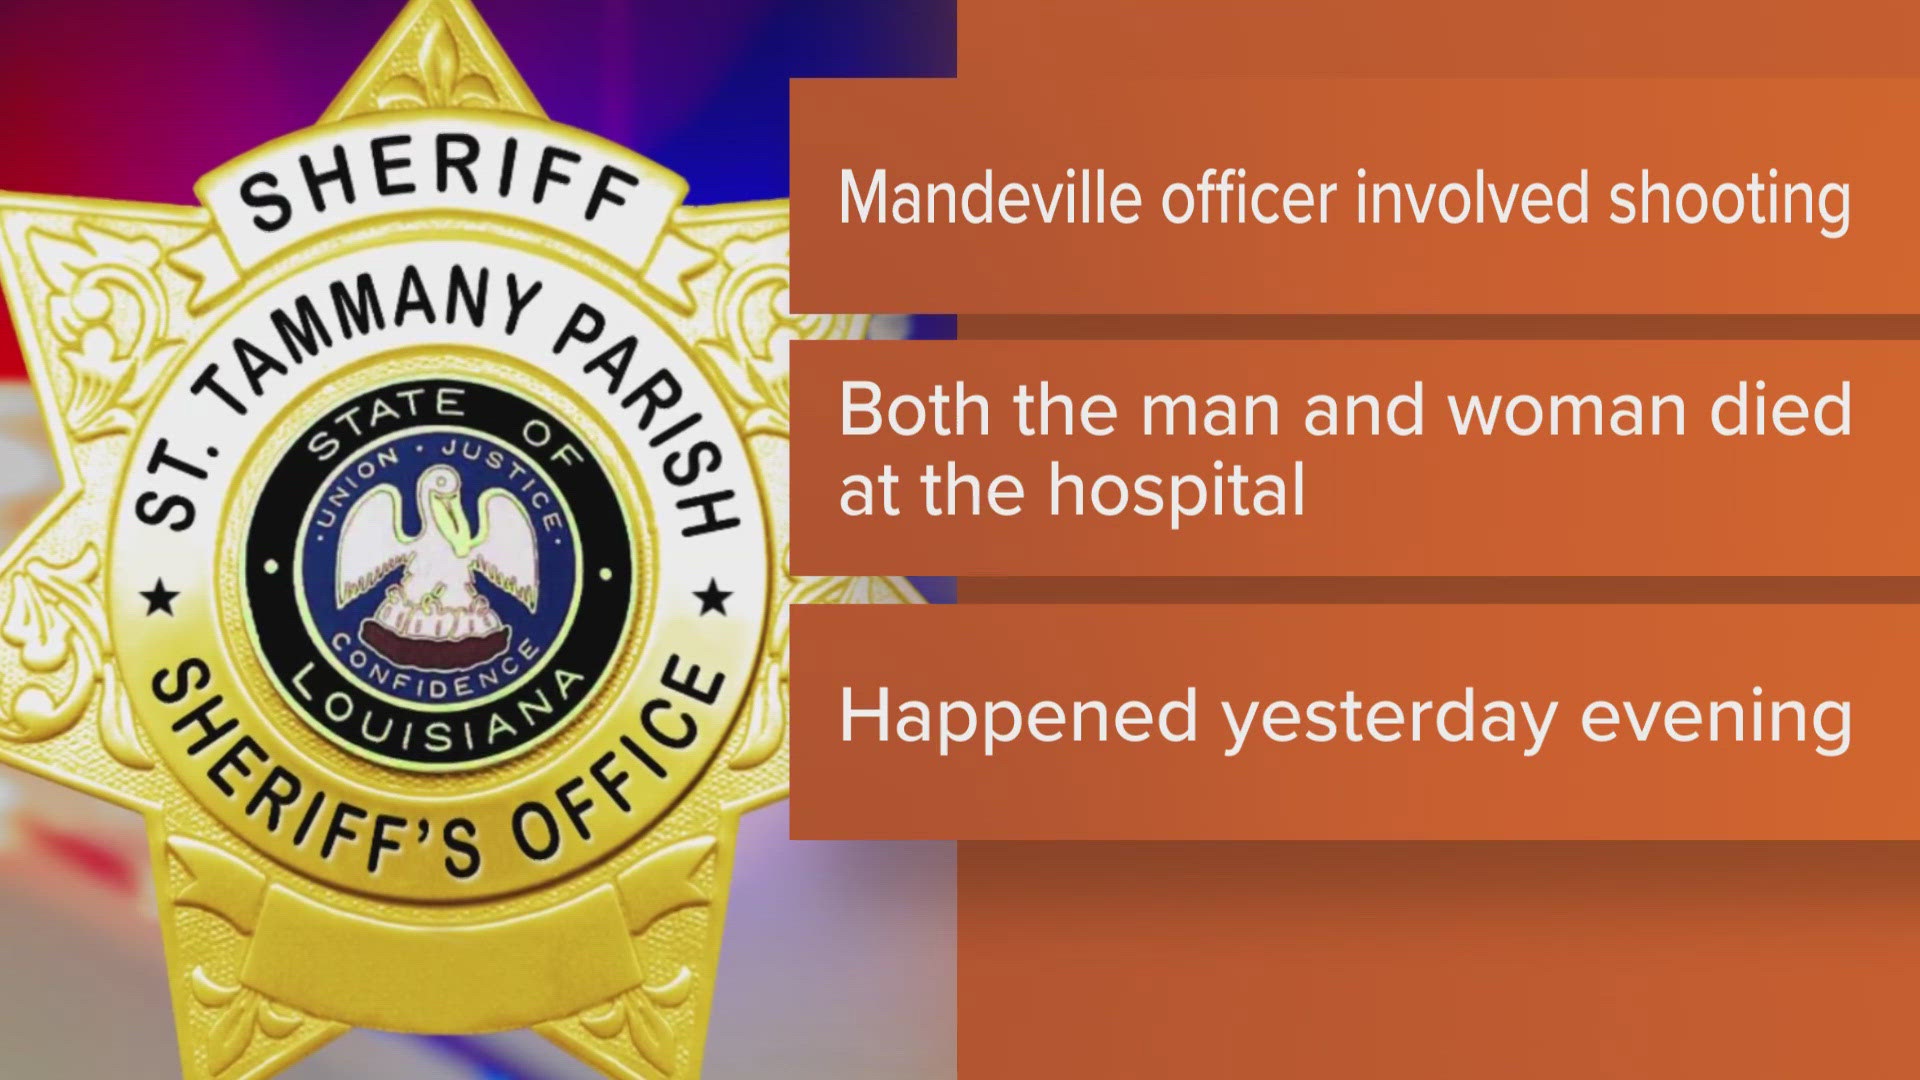 Mandeville Police responded to a call for help and say they saw a man shot a woman running from a home. They eventually shot and killed the man.